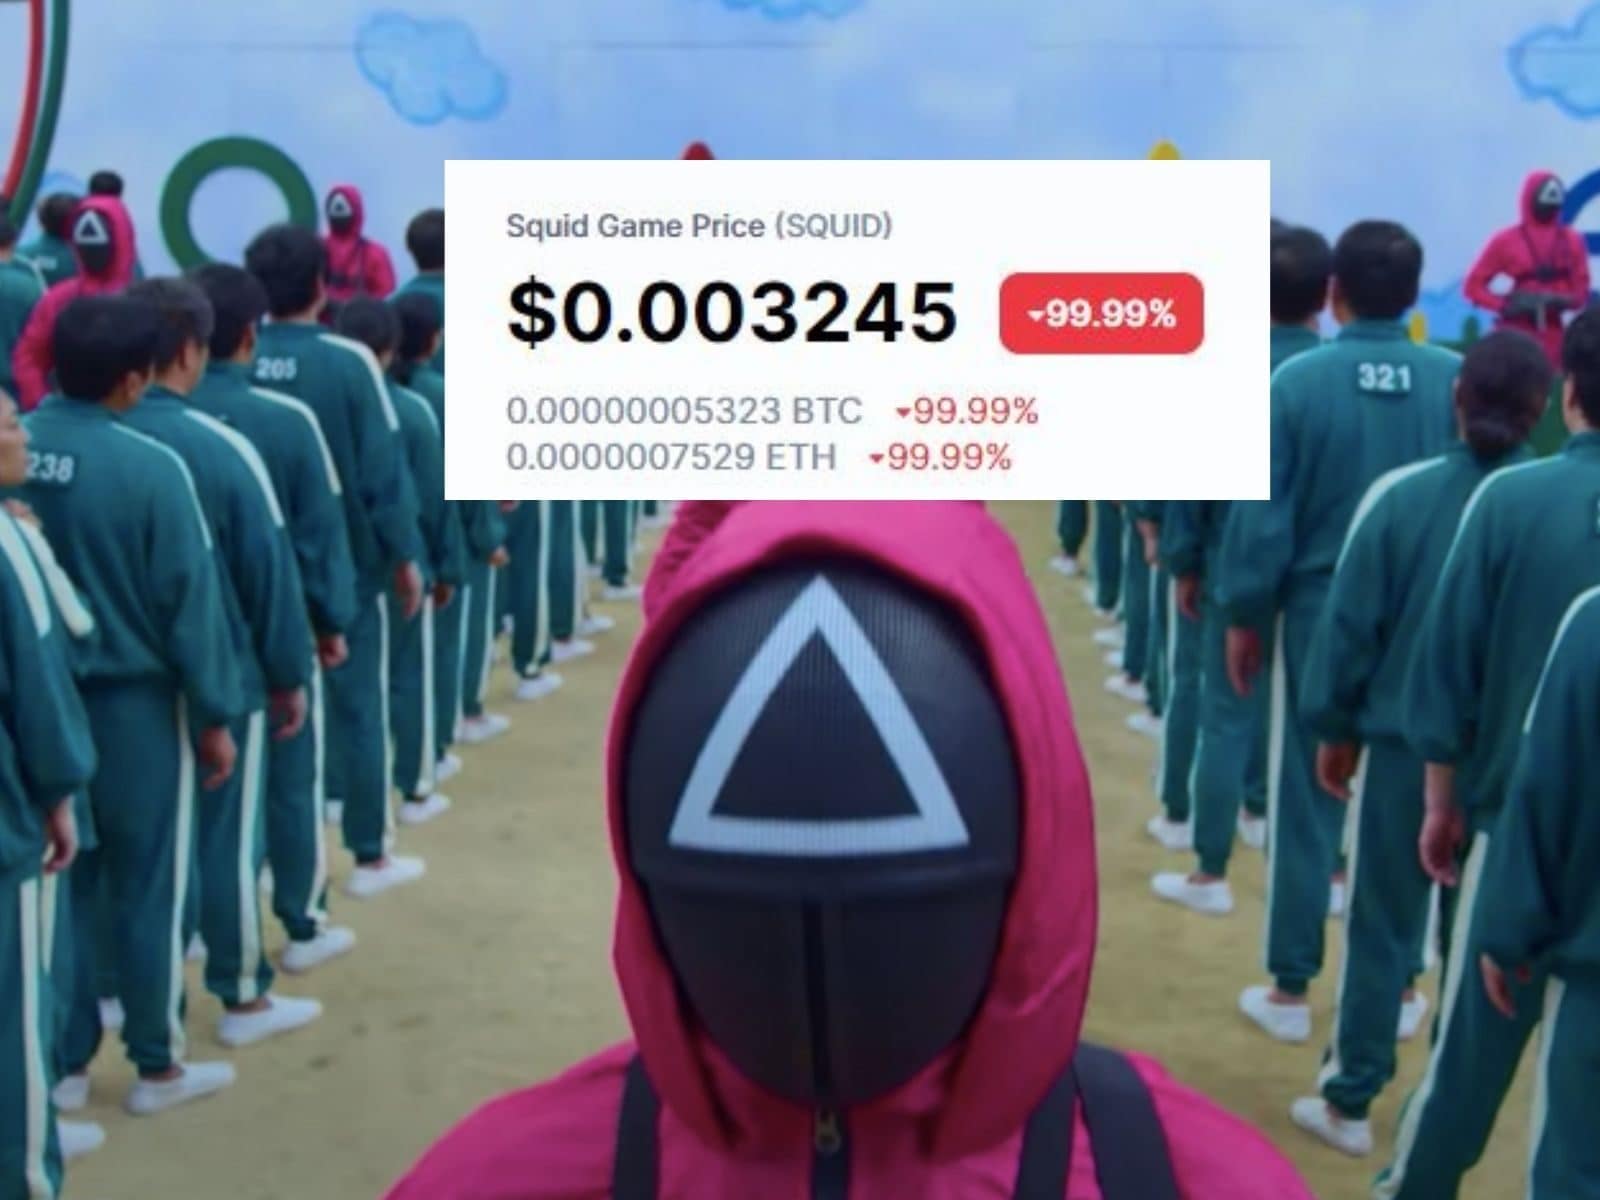 Squid Game' Cryptocurrency Collapses Scammers Steal $2.1 Million